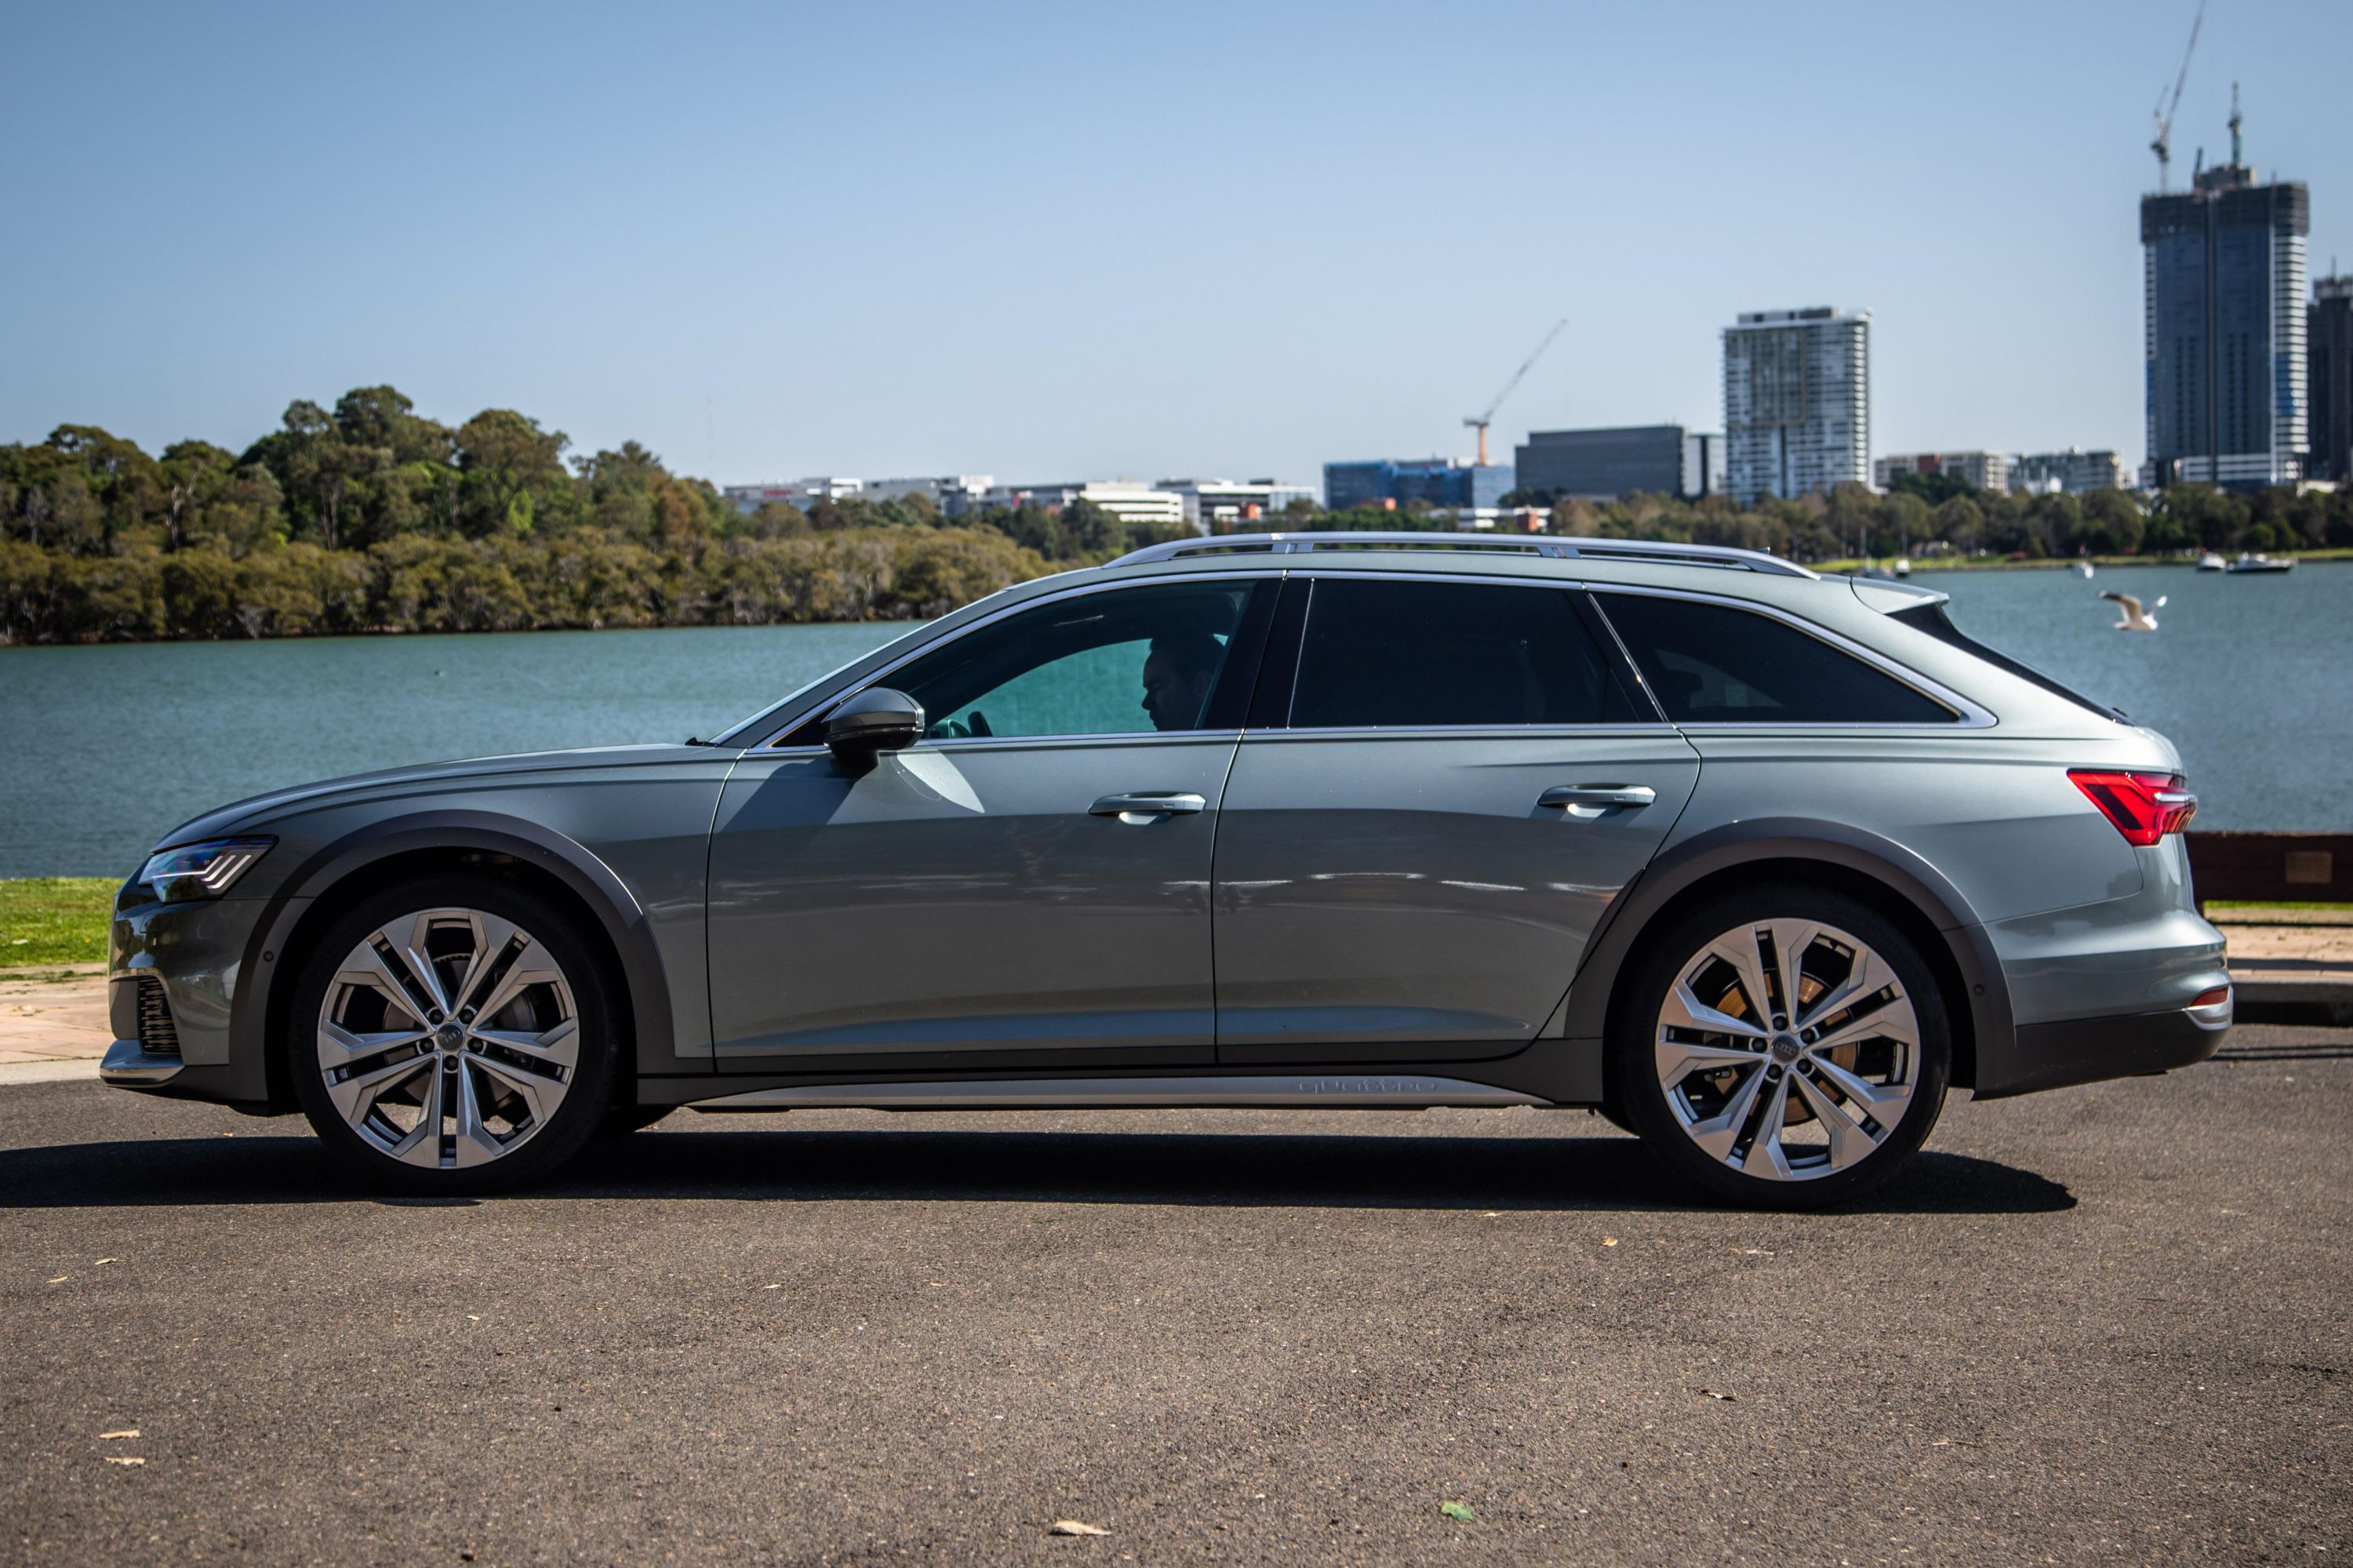 2020 Audi A6 Allroad Review, Pricing, & Pictures